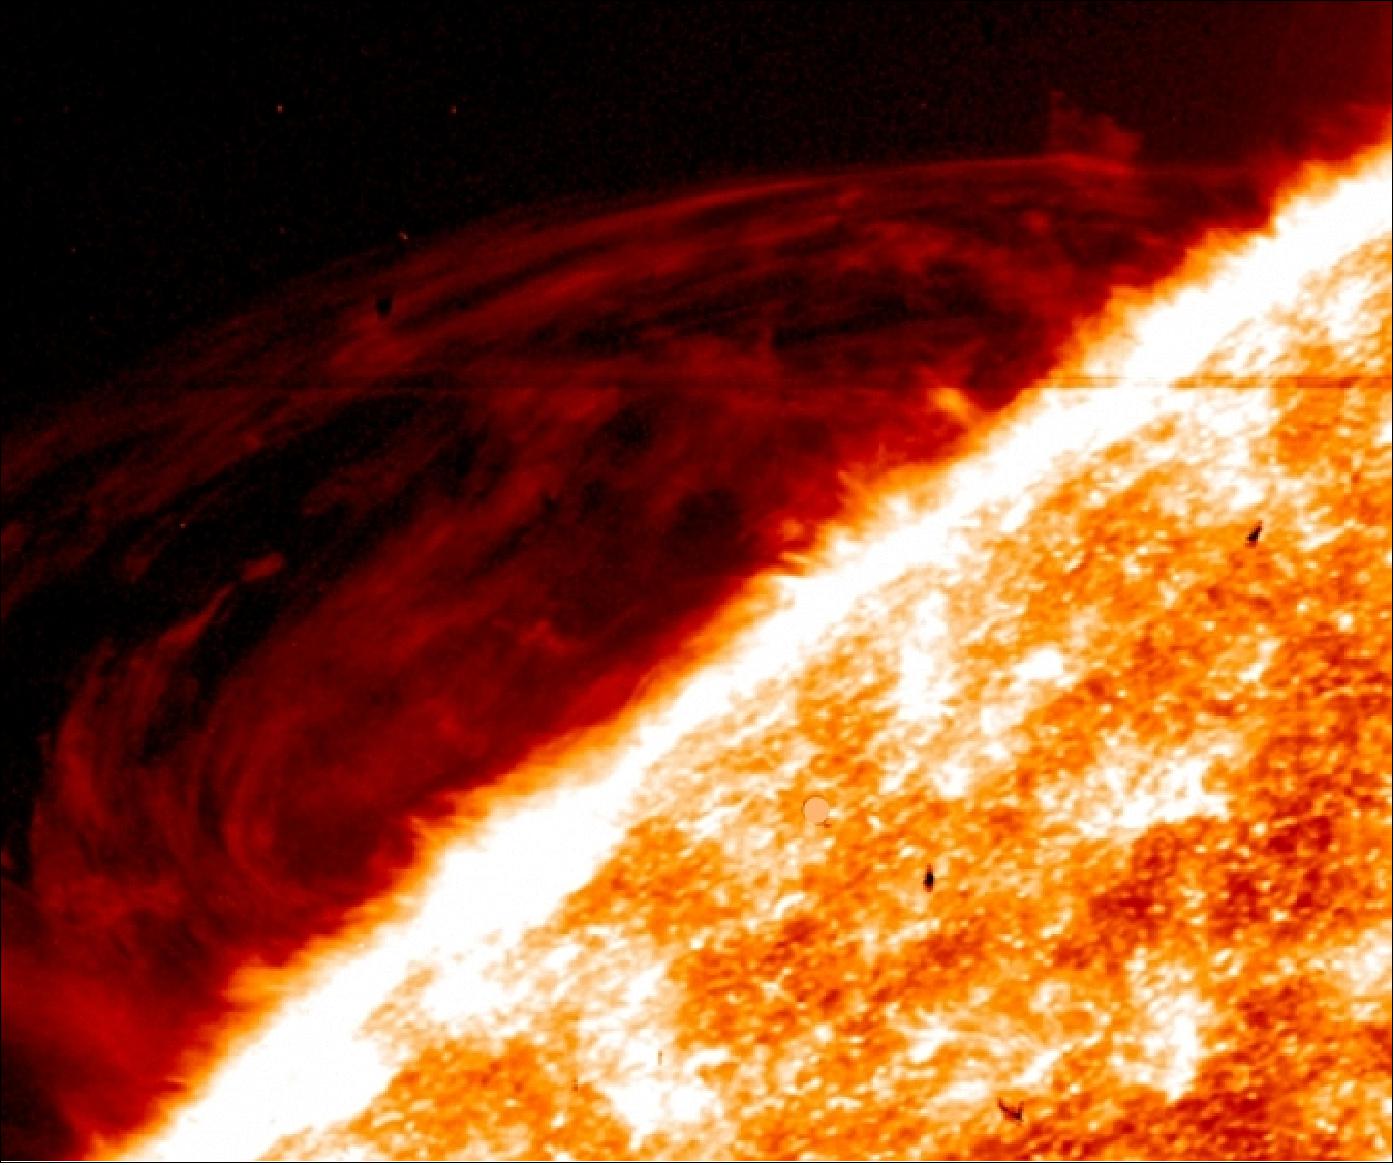 Figure 23: The fine detail in images of prominences in the sun's atmosphere from NASA's IRIS mission – such as the red swirls shown here – are challenging the way scientists understand such events (image credit: NASA, LMSAL, IRIS collaboration)